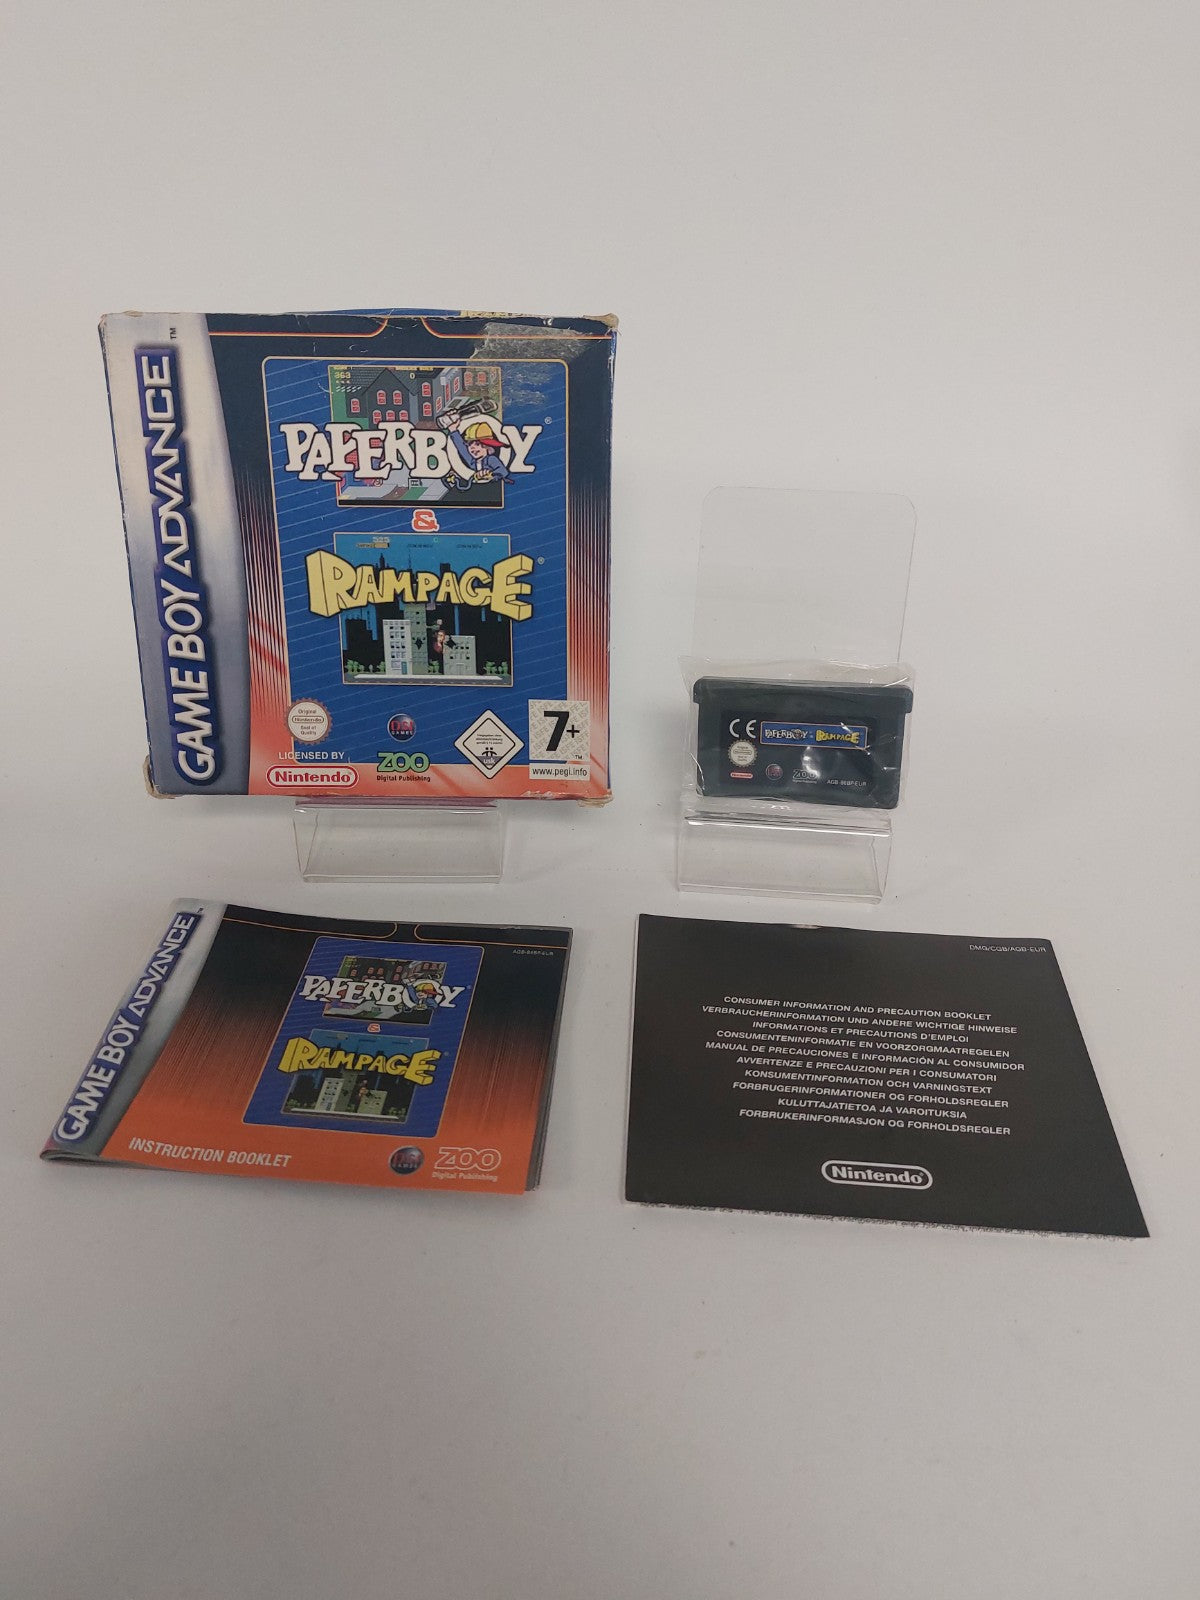 Paperboy & Rampage Compleet Game Boy Advance